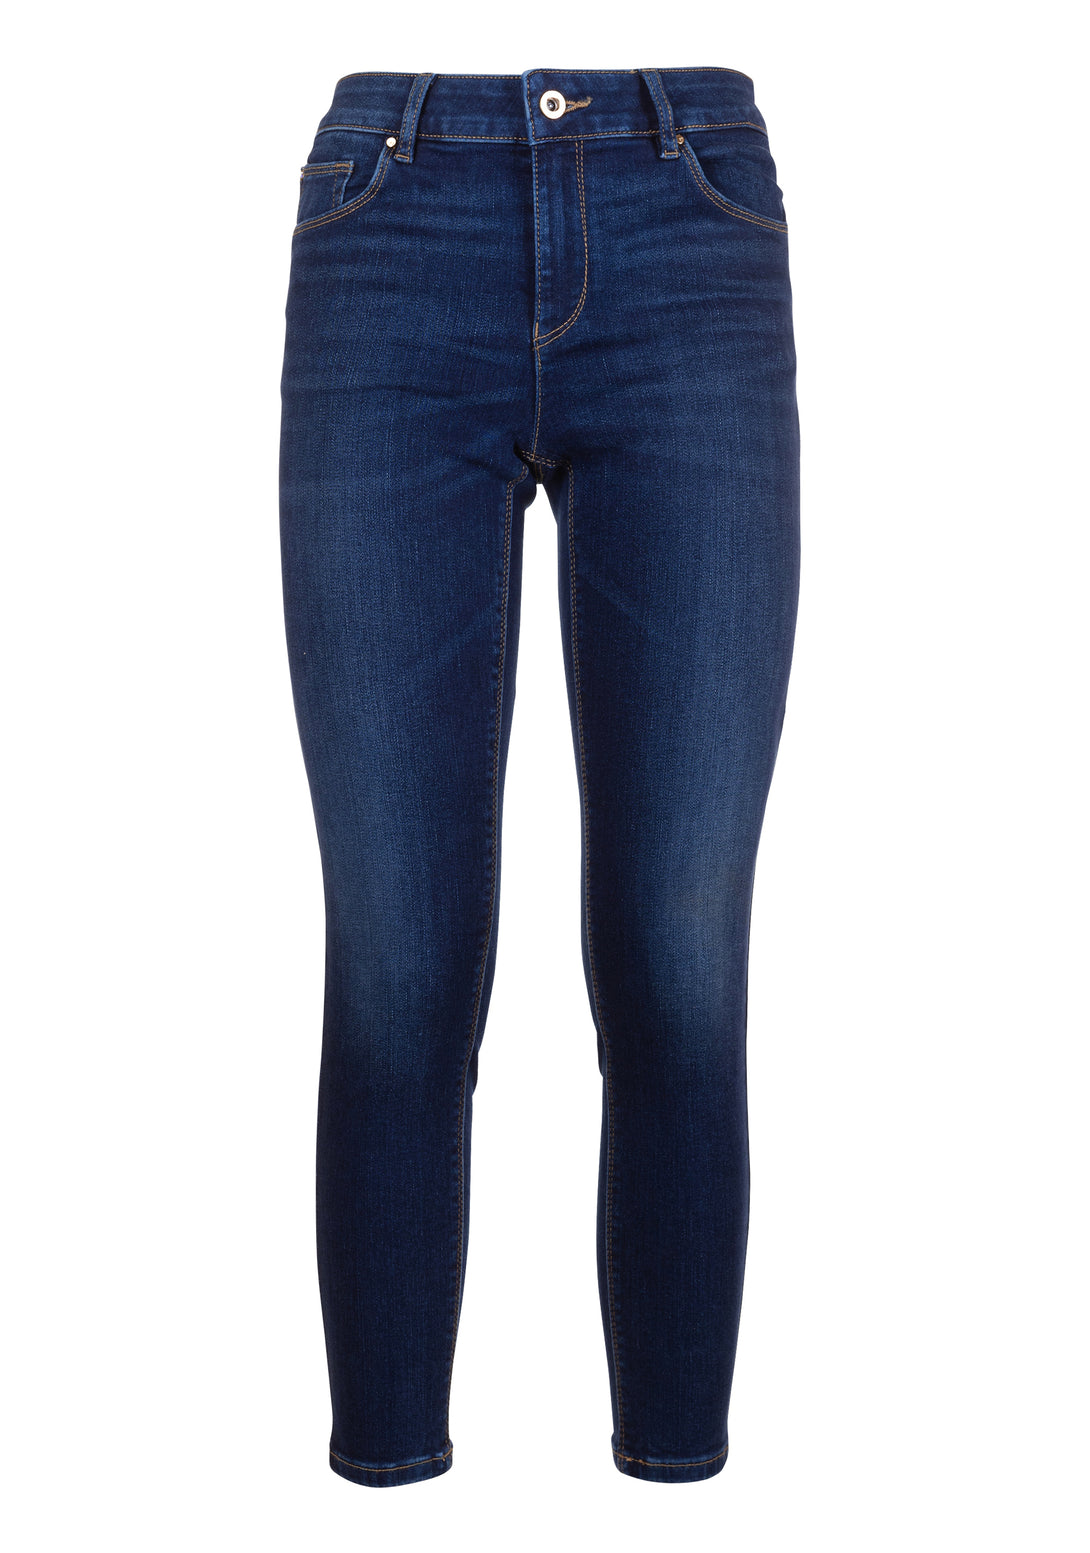 Jeans skinny fit with push-up effect made in denim with dark wash Fracomina FP23SV8000D40101-987-1